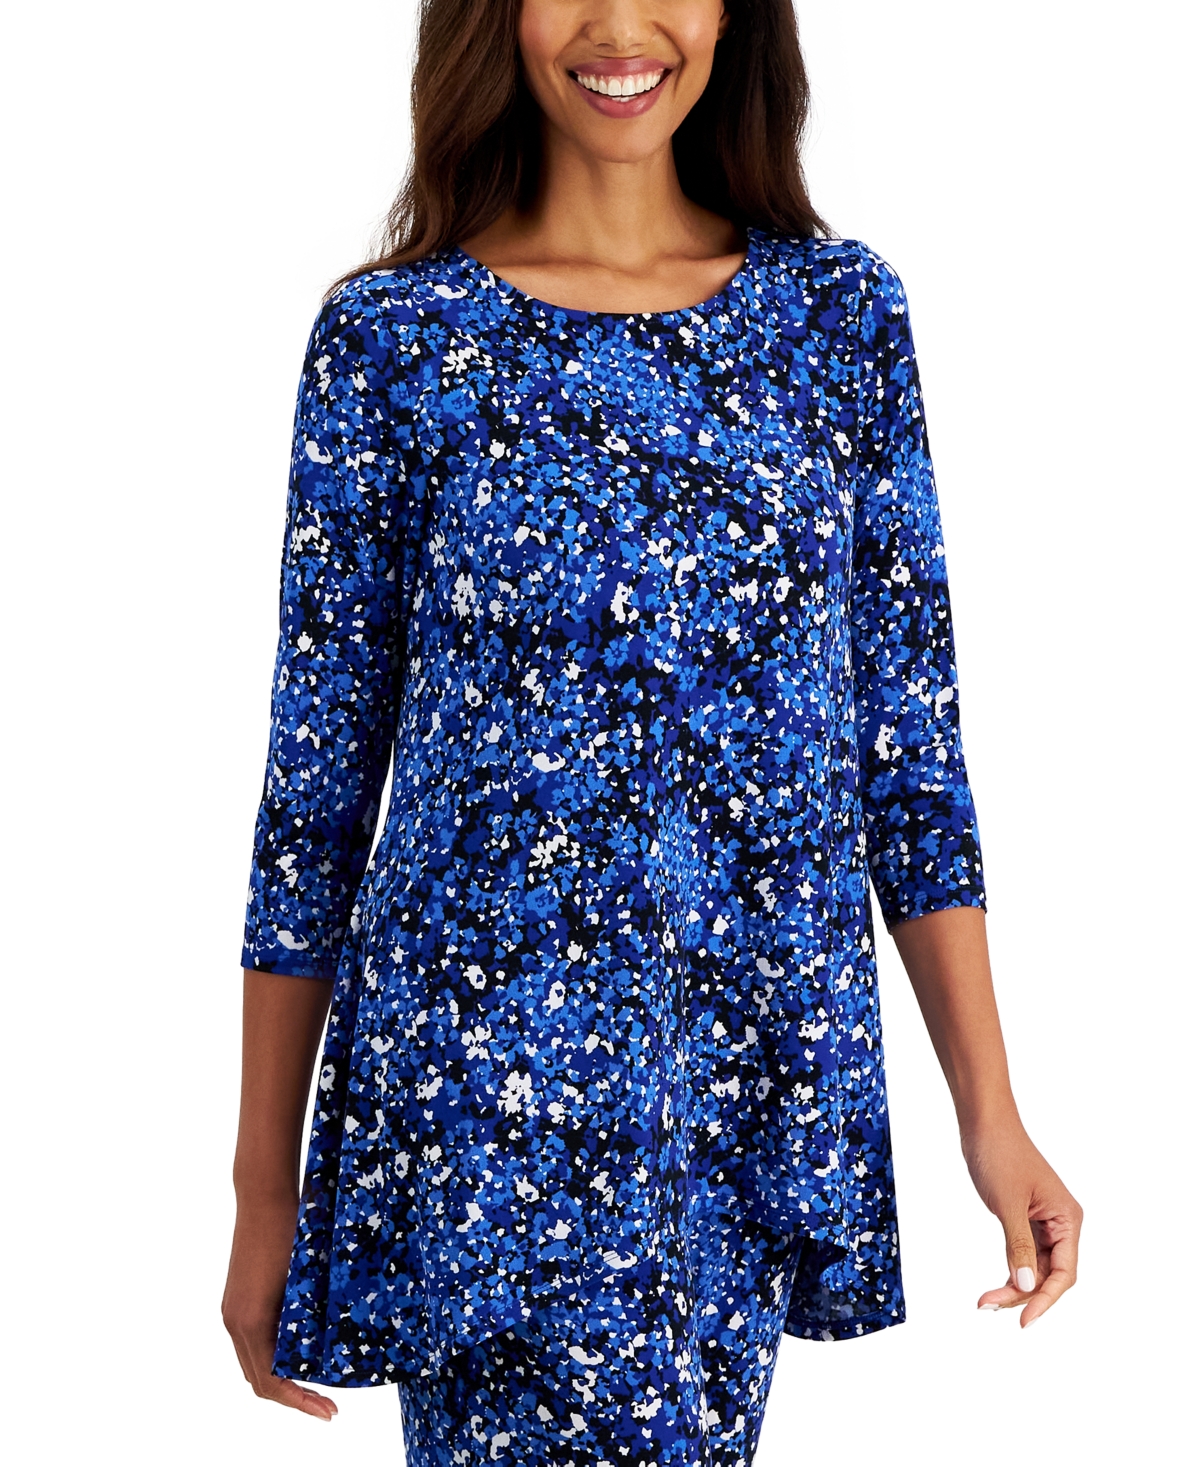 Women's 3/4 Sleeve Knit Dressing Printed Swing Top, Created for Macy's - Modern Blue Combo